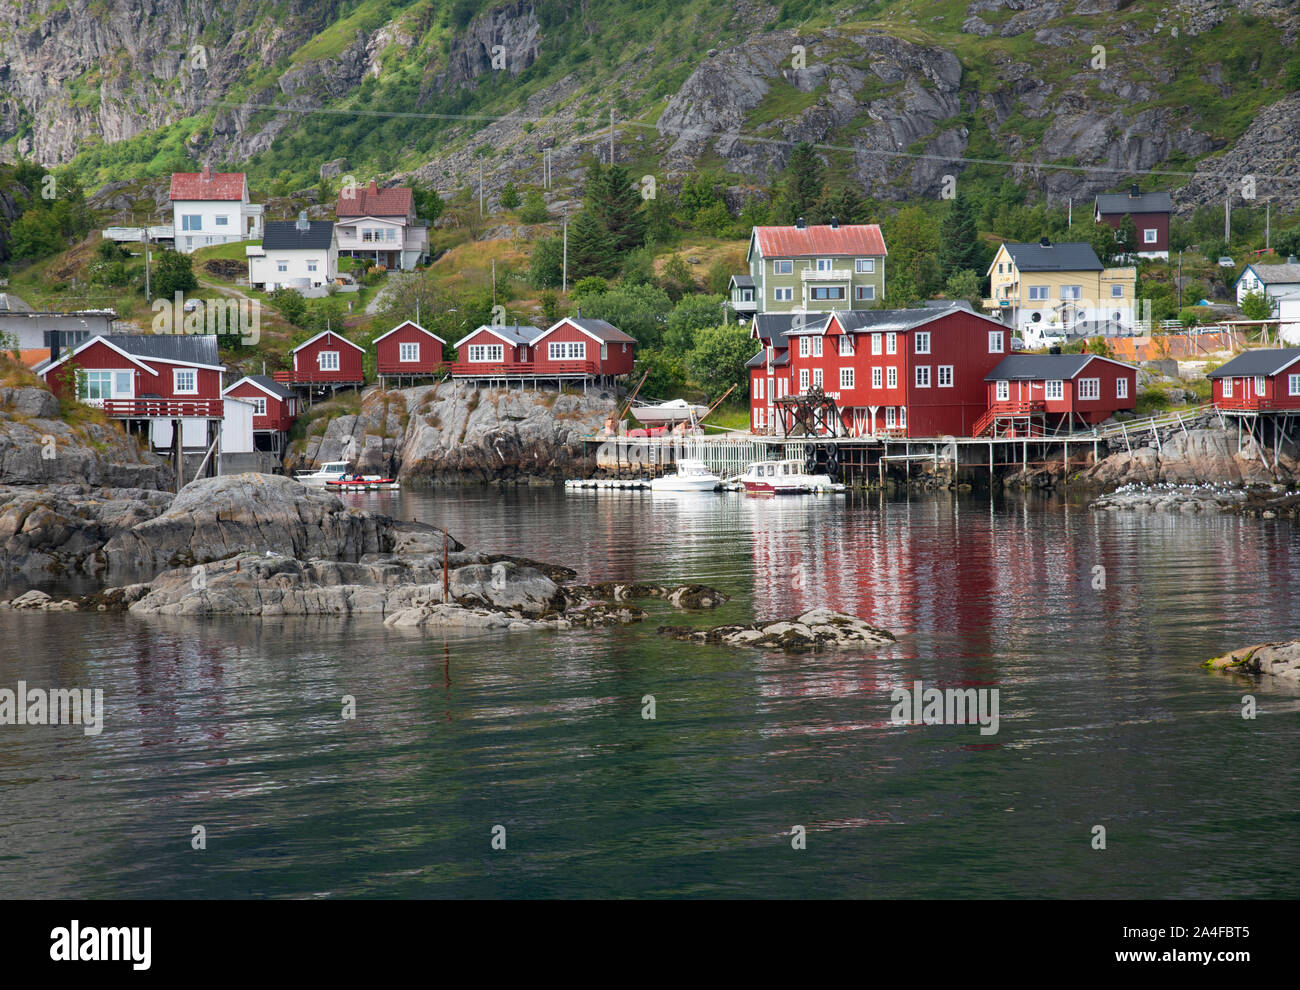 Colourful rorbu, fishermen’s cabins, in the fishing village of A on Vest Fjord, Moskenesoy, the Lofoten Islands, Norway Stock Photo